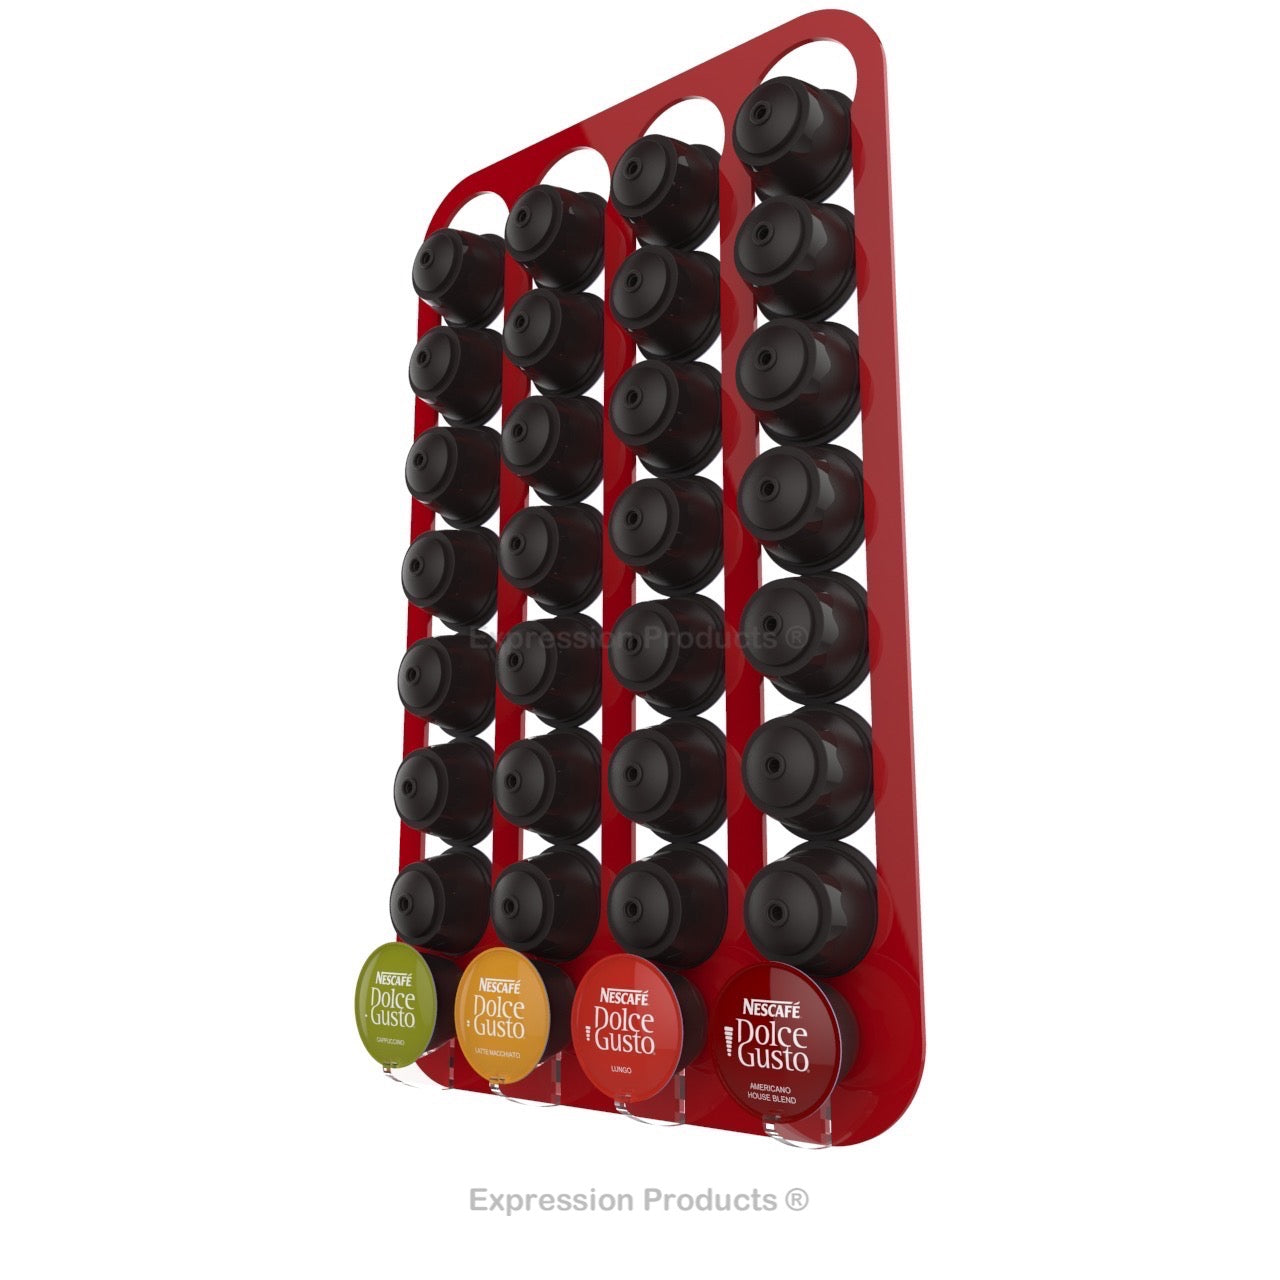 Dolce Gusto Coffee Pod Holder, Wall Mounted.  Shown in Red Holding 32 Pods